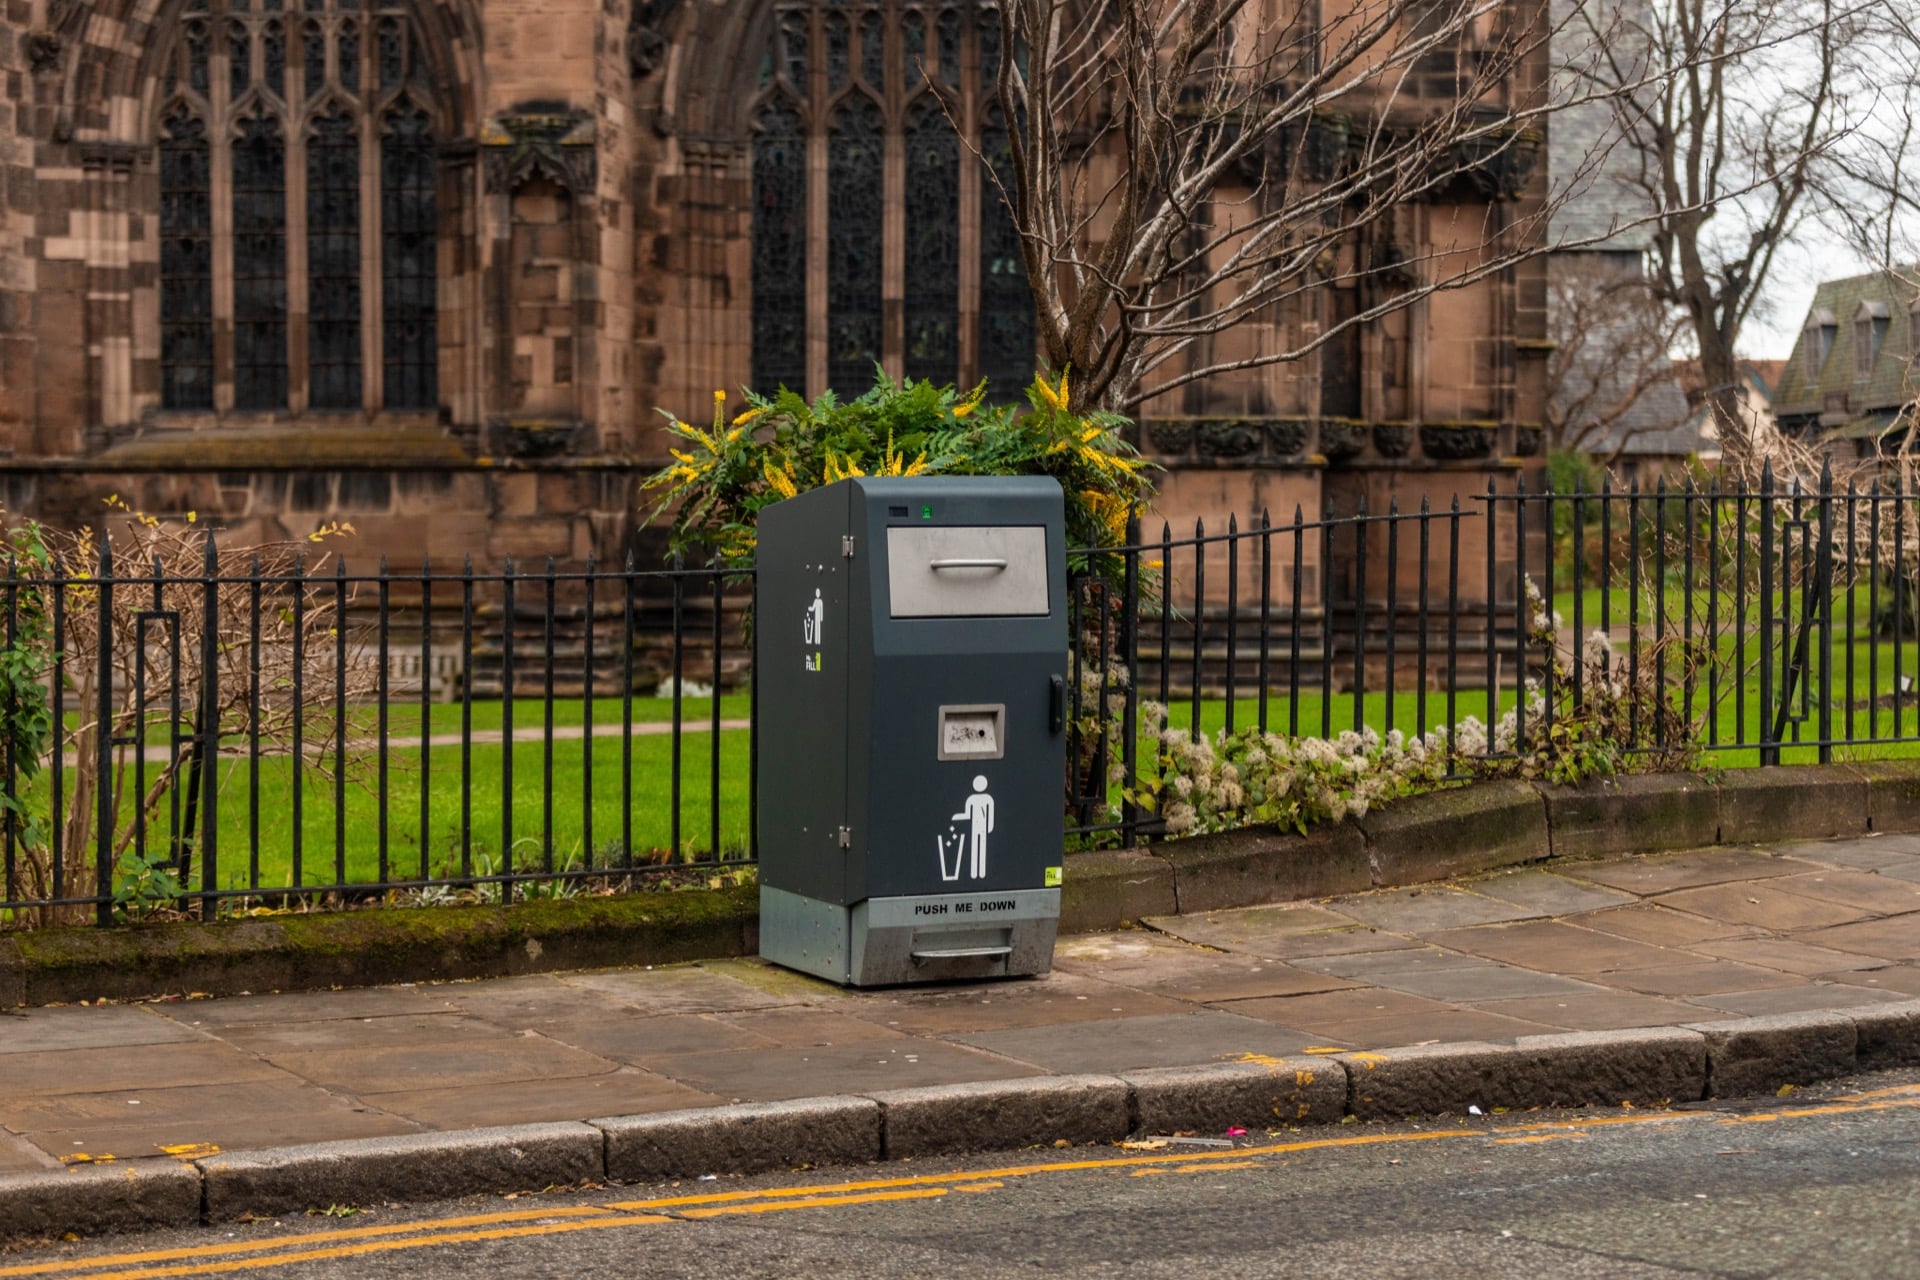 Smart waste management in Chester city